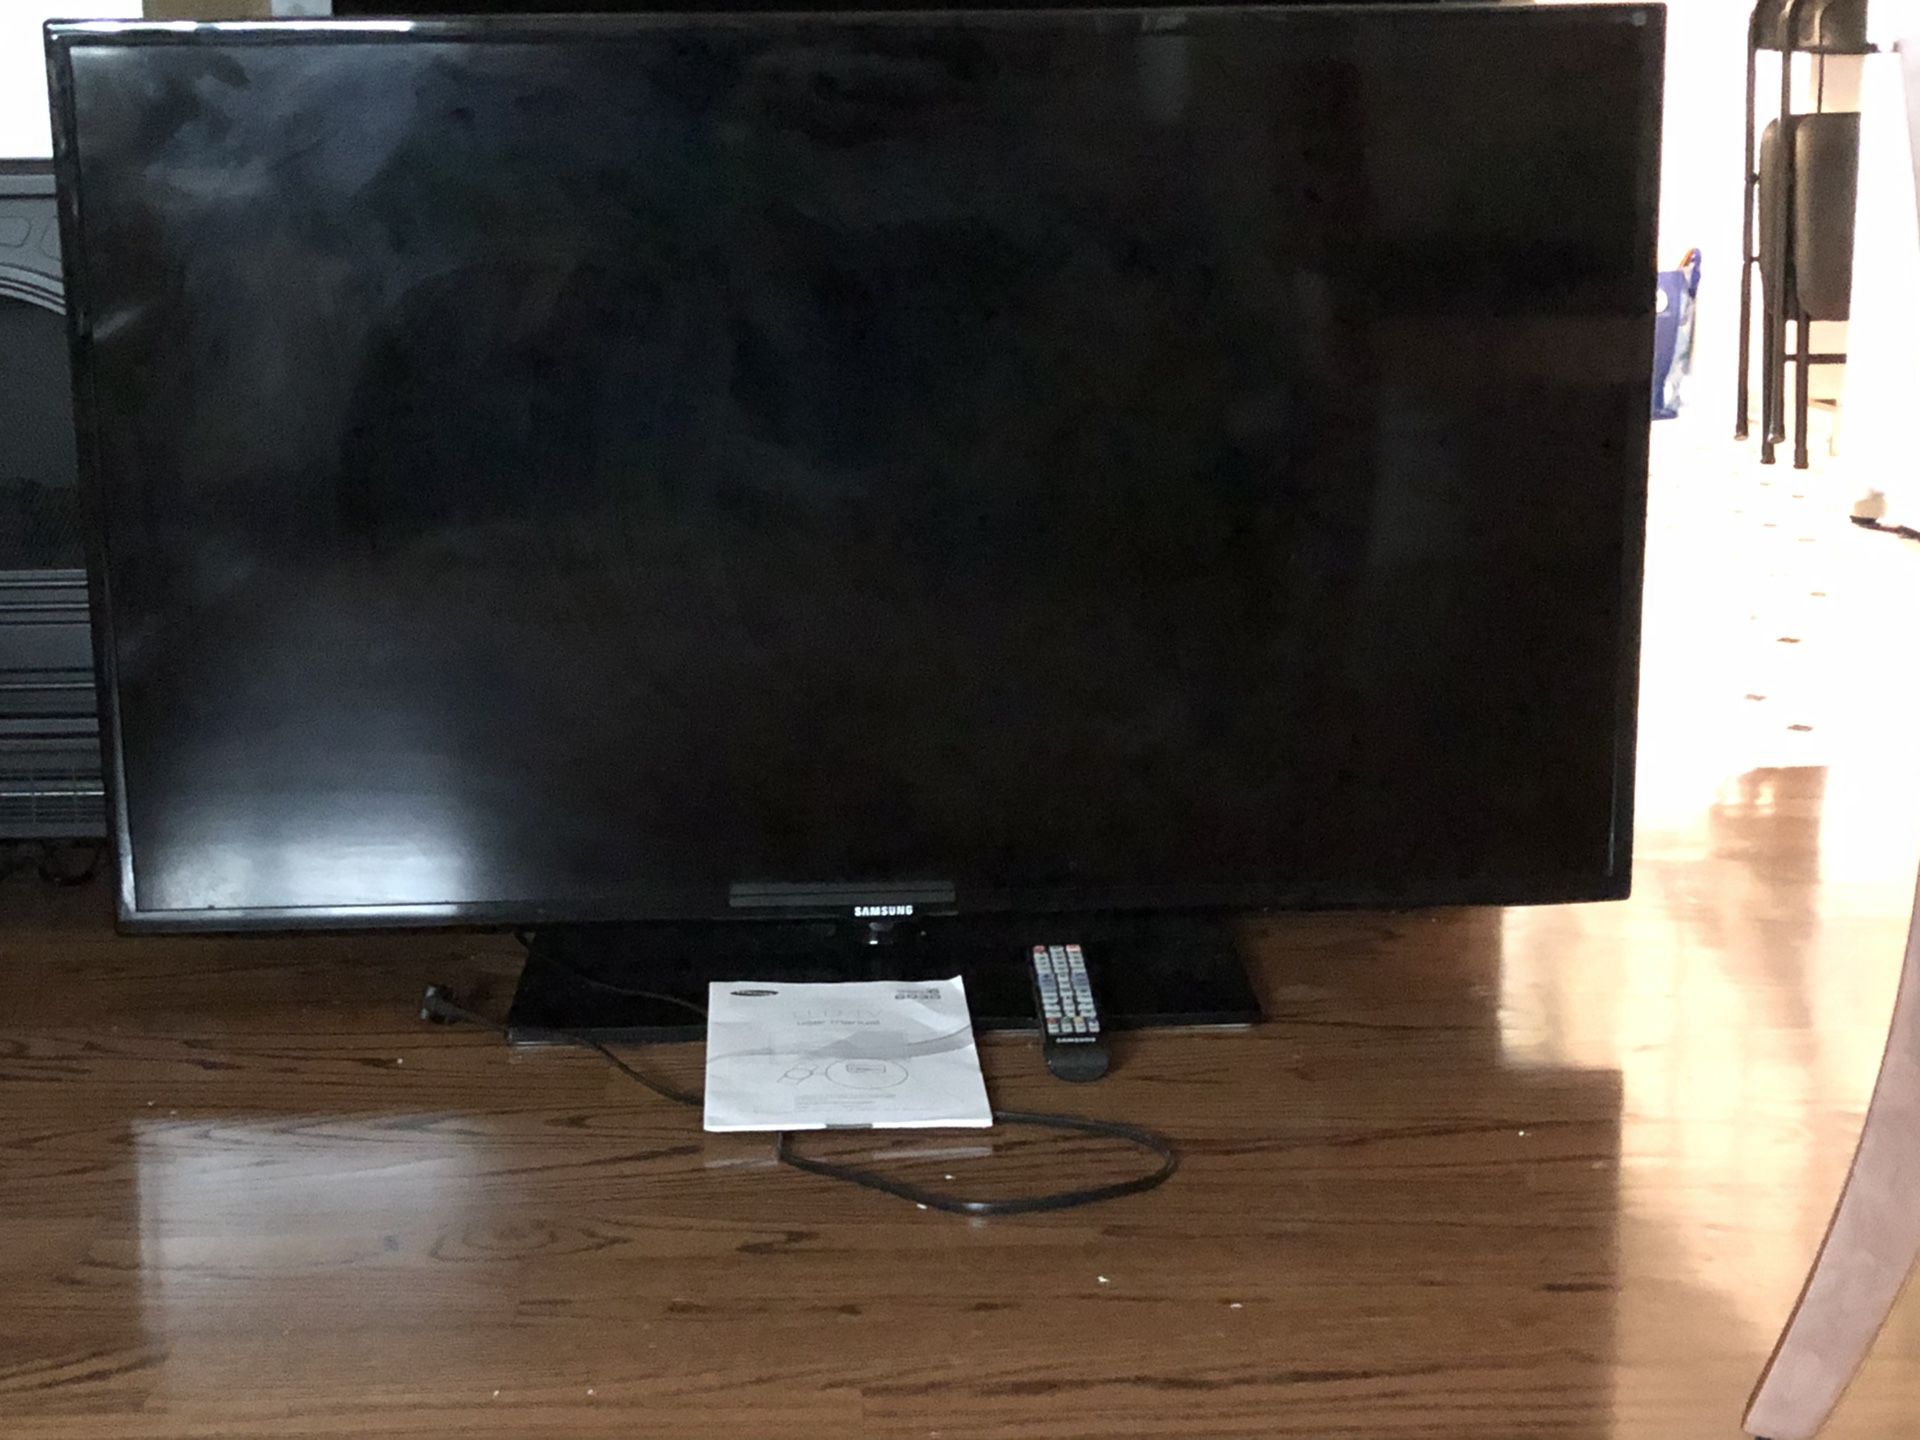 Samsung 46" LED TV - Great condition!